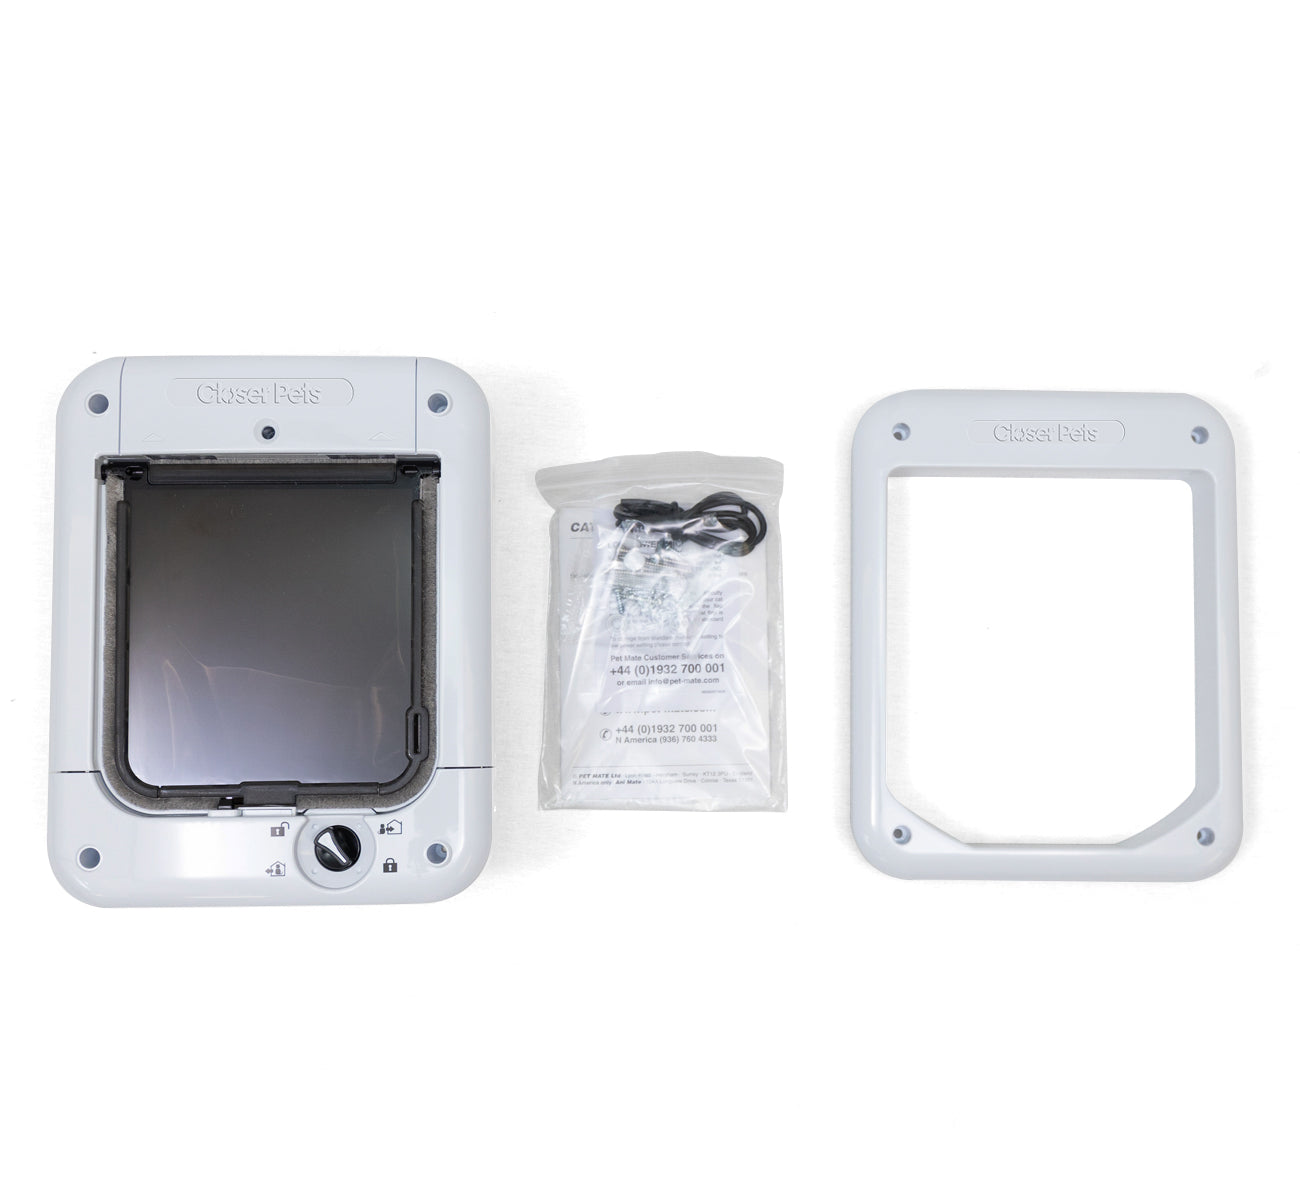 Closer Pets Microchip-activated Weatherproof Flap/Door with Manual Lock – White (CP 360W)